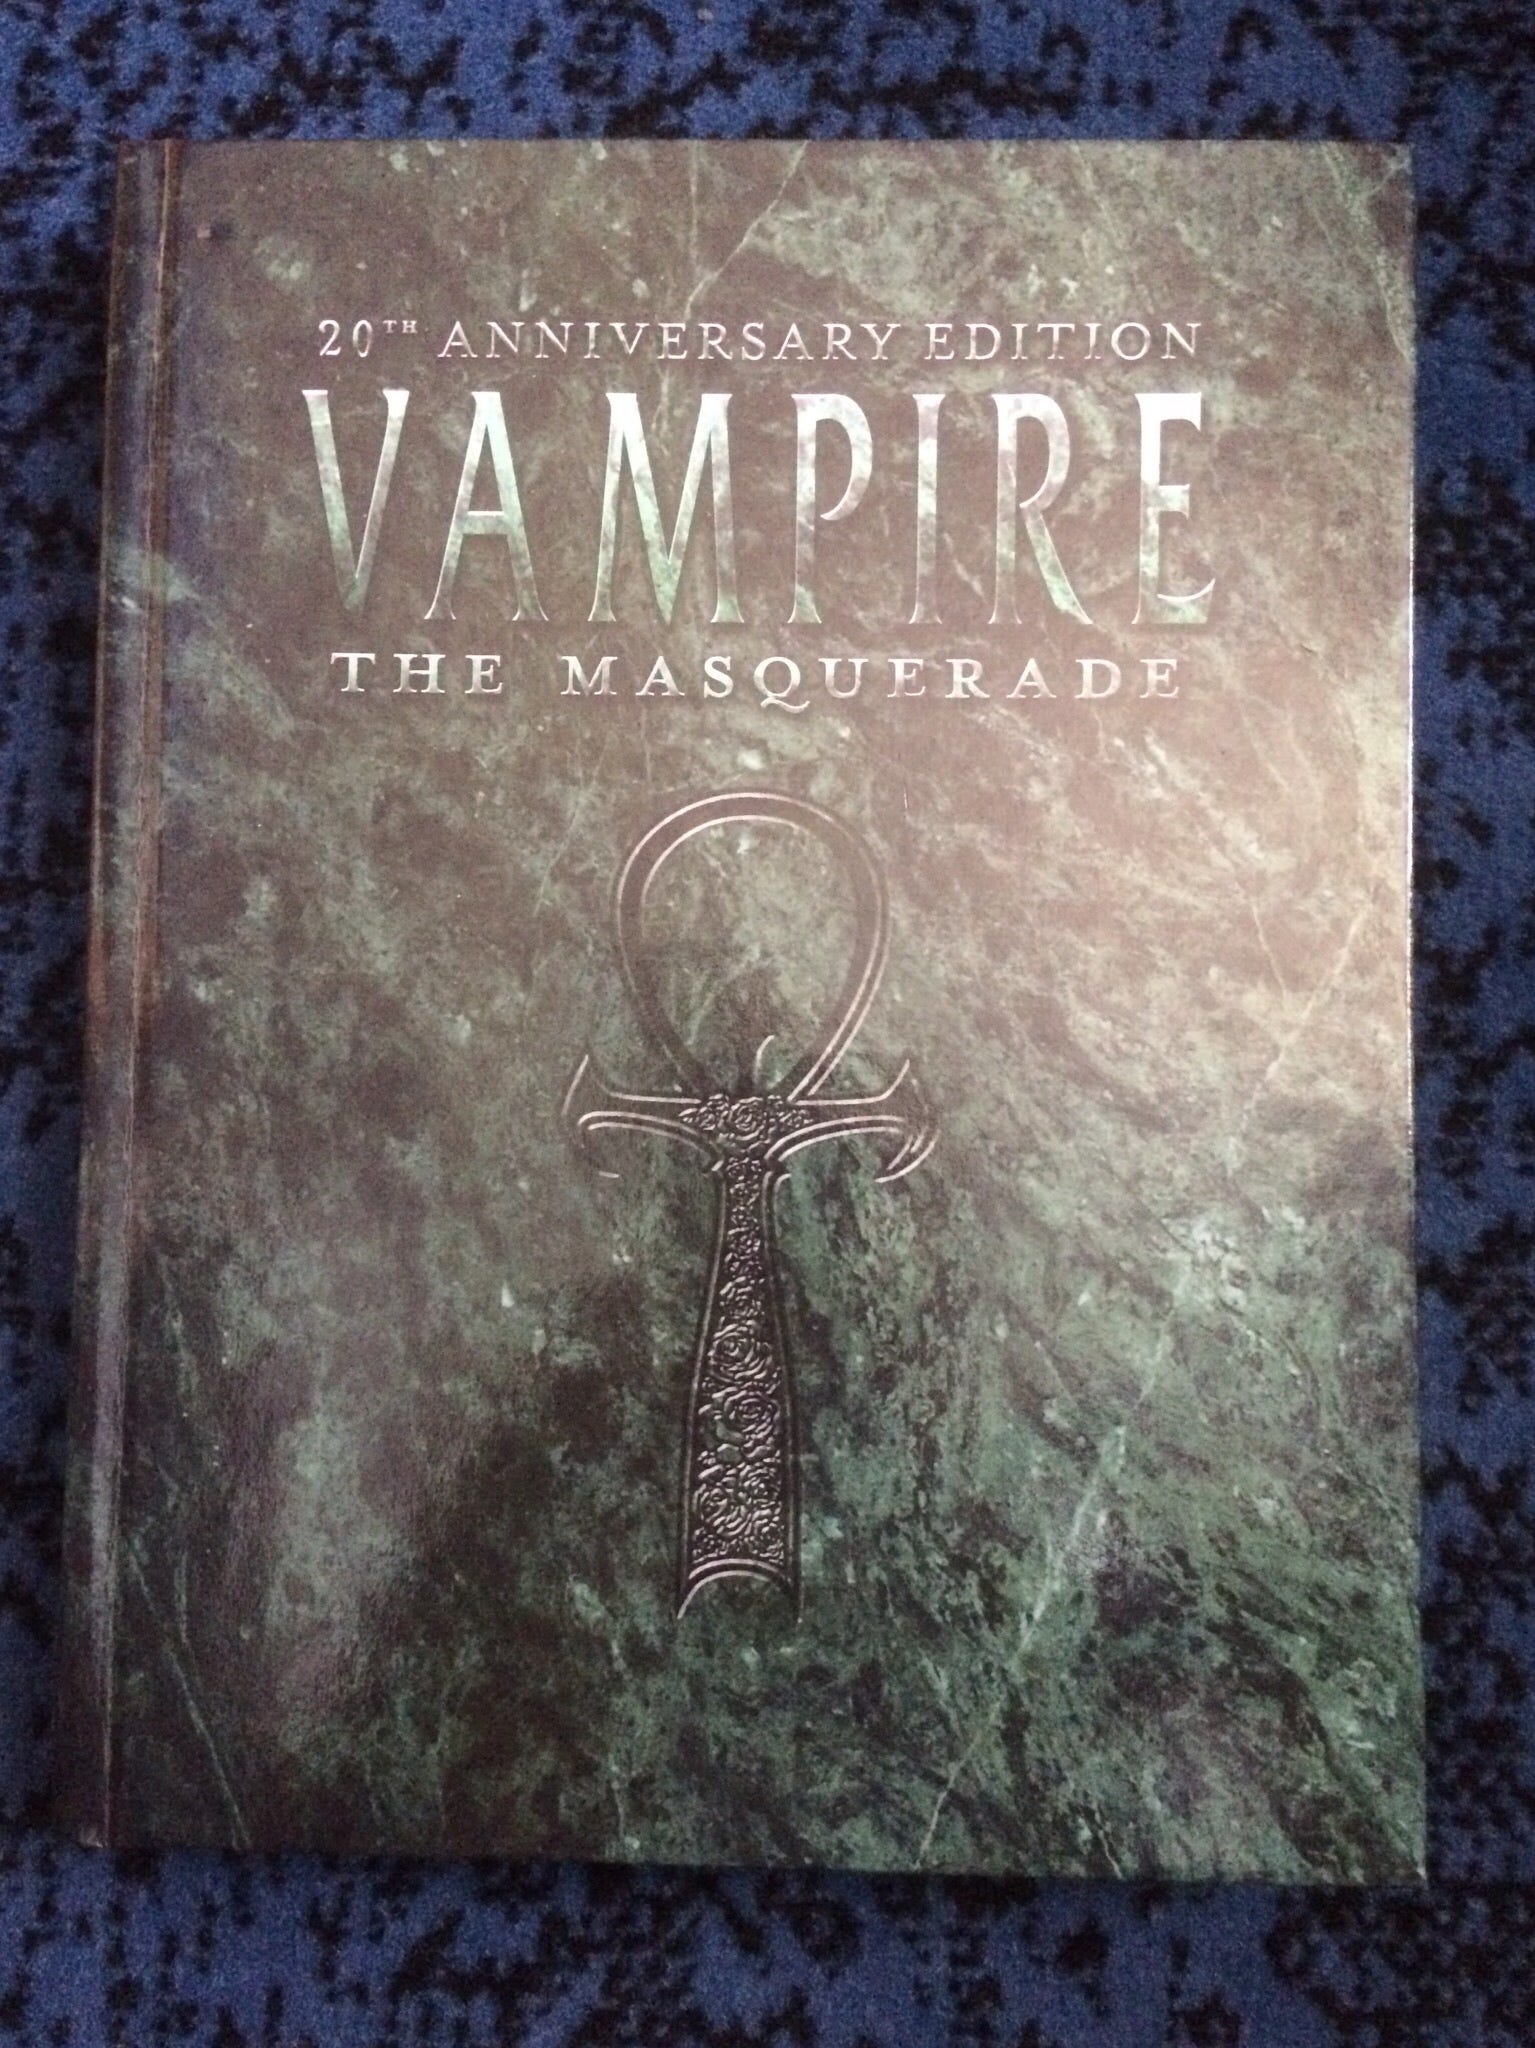 My Thoughts on Vampire: The Masquerade-Redemption, by Daniel Mayfair